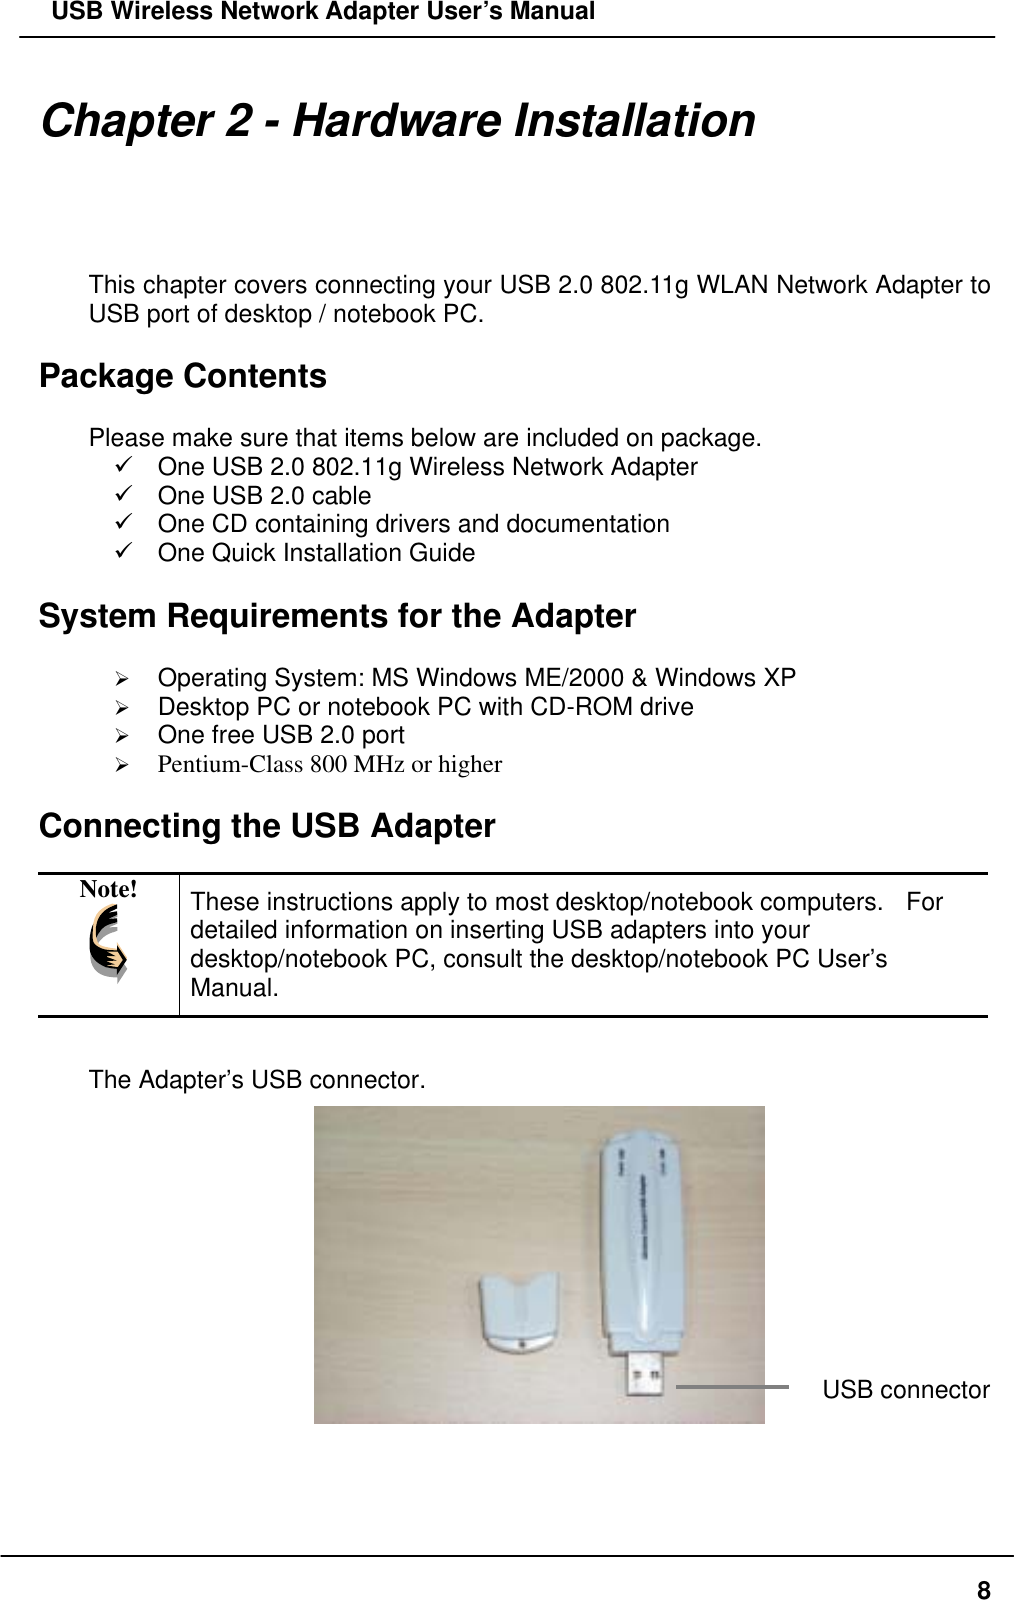   USB Wireless Network Adapter User’s Manual Chapter 2 - Hardware Installation This chapter covers connecting your USB 2.0 802.11g WLAN Network Adapter to USB port of desktop / notebook PC.  Package Contents  Please make sure that items below are included on package.  One USB 2.0 802.11g Wireless Network Adapter  One USB 2.0 cable  One CD containing drivers and documentation  One Quick Installation Guide  System Requirements for the Adapter    Operating System: MS Windows ME/2000 &amp; Windows XP     Desktop PC or notebook PC with CD-ROM drive   One free USB 2.0 port   Pentium-Class 800 MHz or higher  Connecting the USB Adapter  Note!  These instructions apply to most desktop/notebook computers.   For detailed information on inserting USB adapters into your desktop/notebook PC, consult the desktop/notebook PC User’s Manual.  The Adapter’s USB connector.    USB connector   8